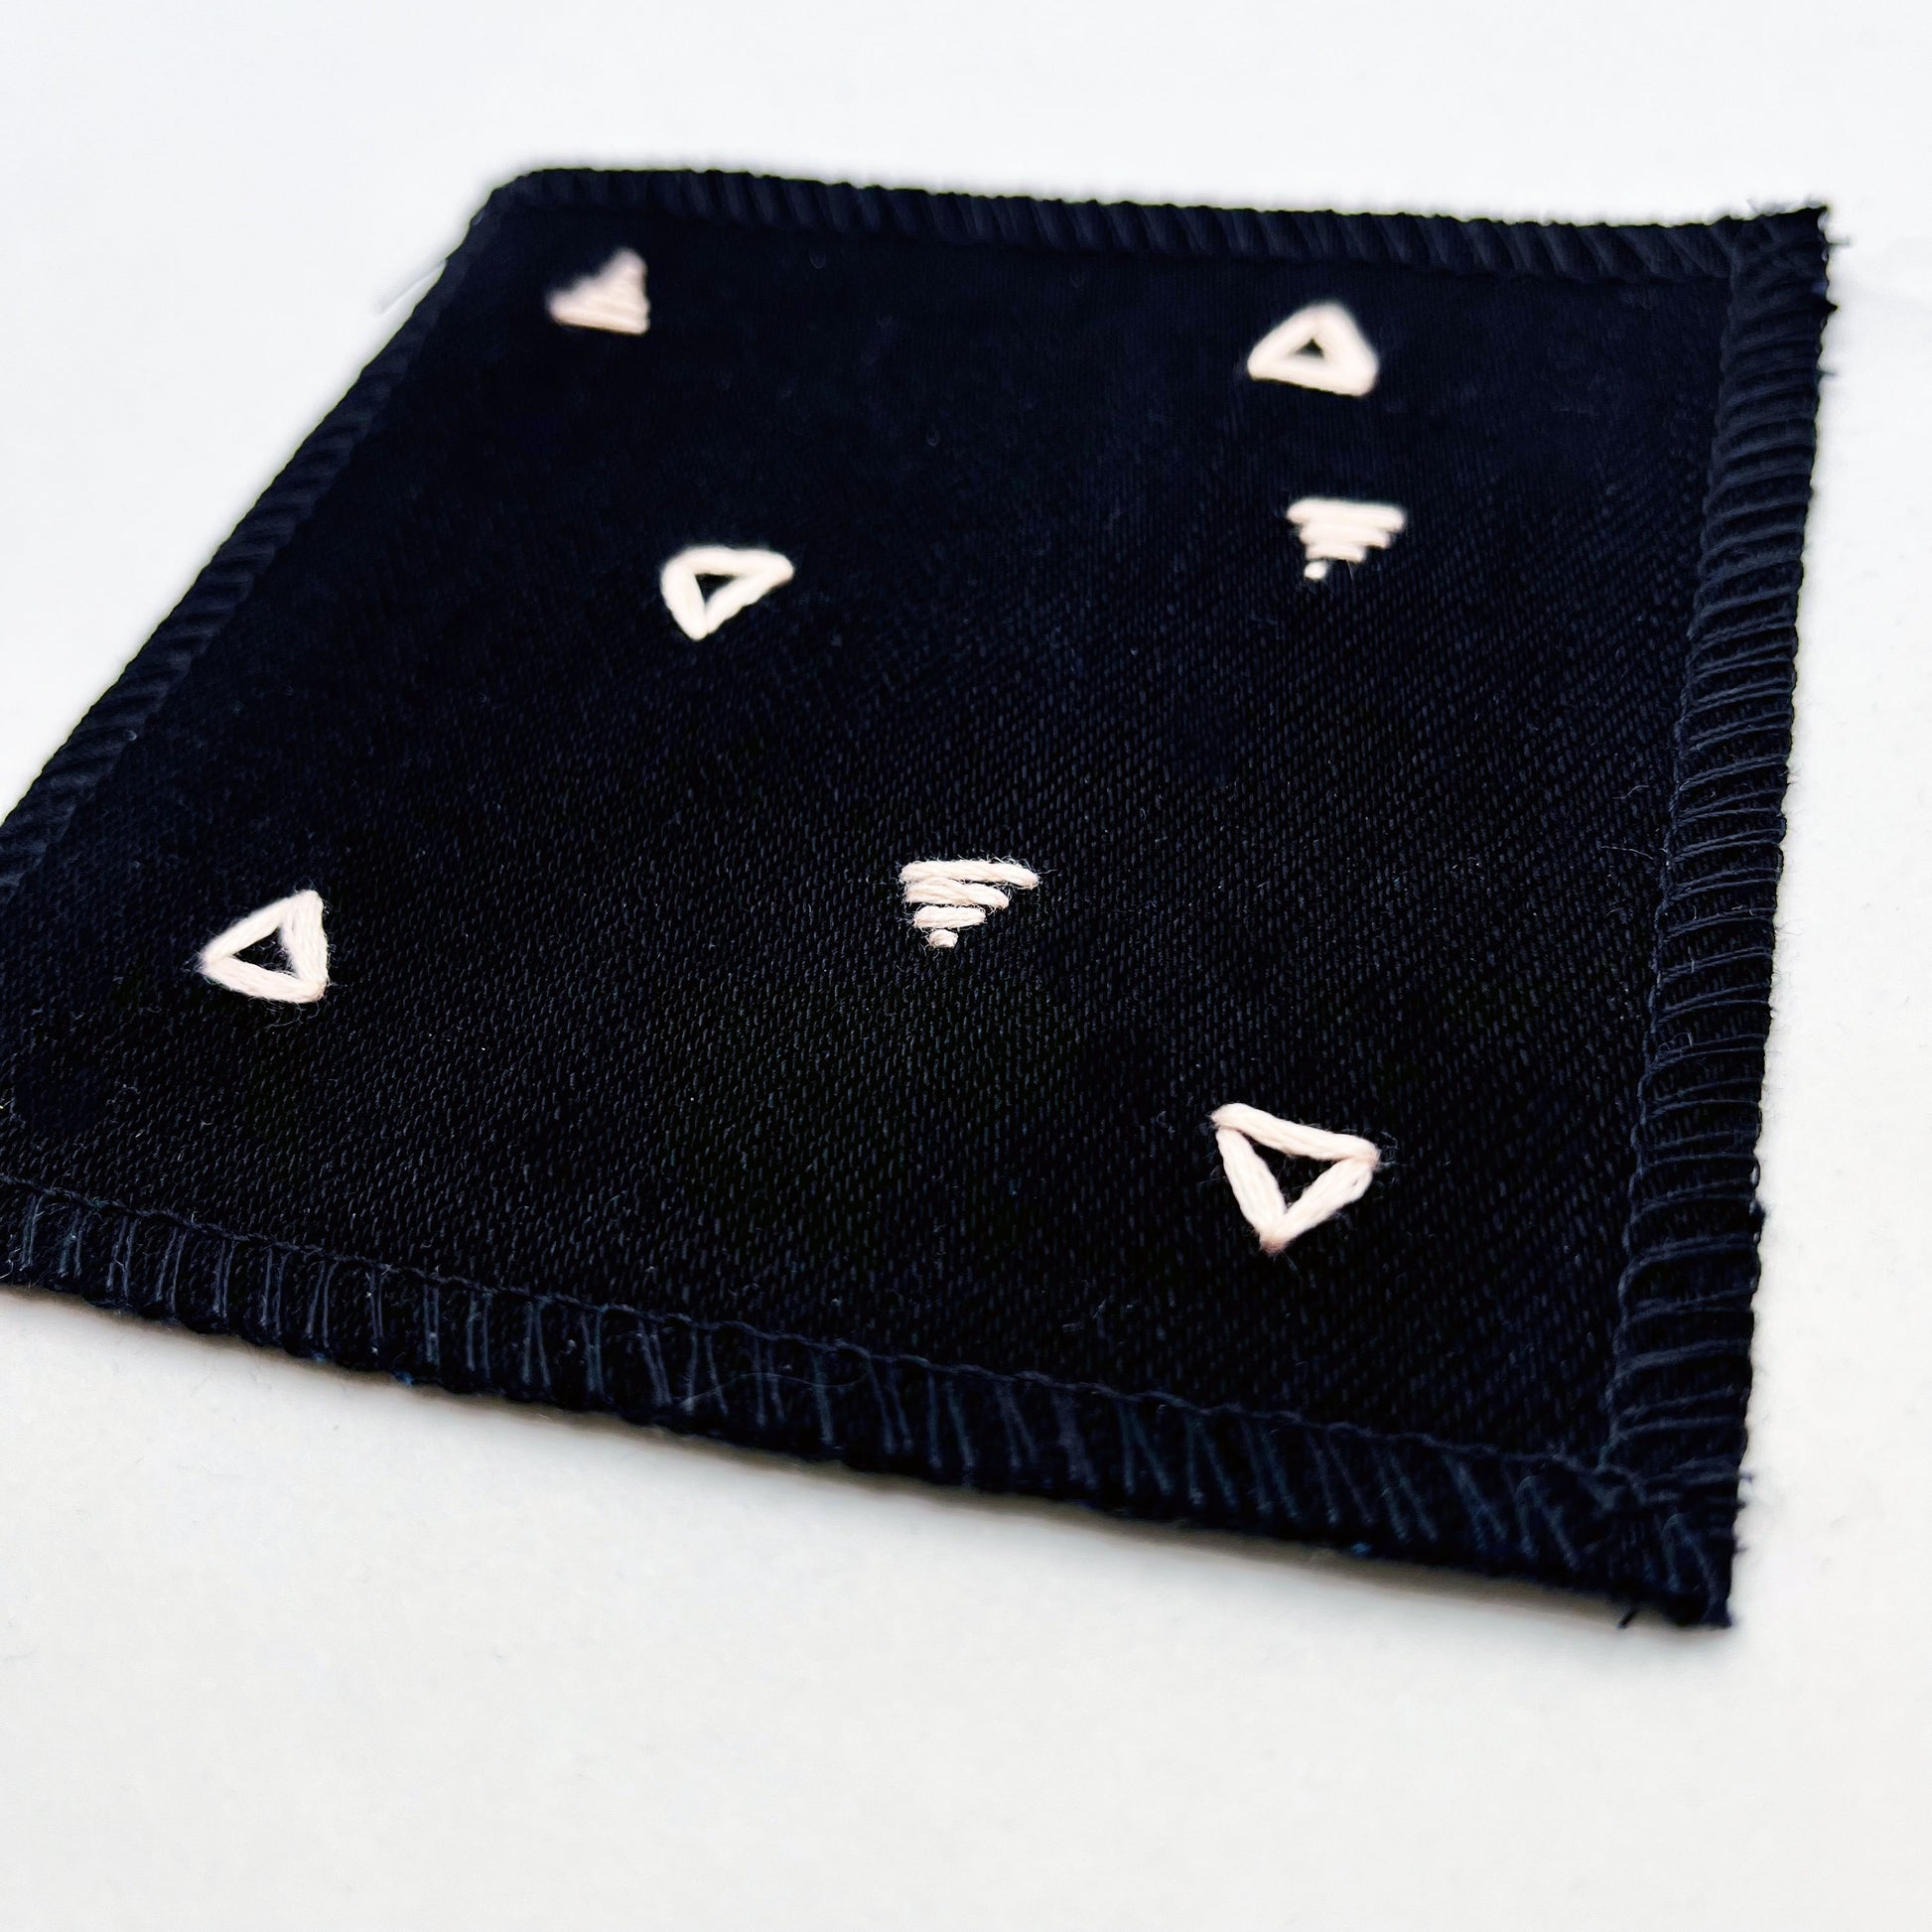 close up angled view of a square patch made out of black canvas, handstitched with scattered peach triangles, some as outlines some with a line fill, with overlocked edges, on a white background